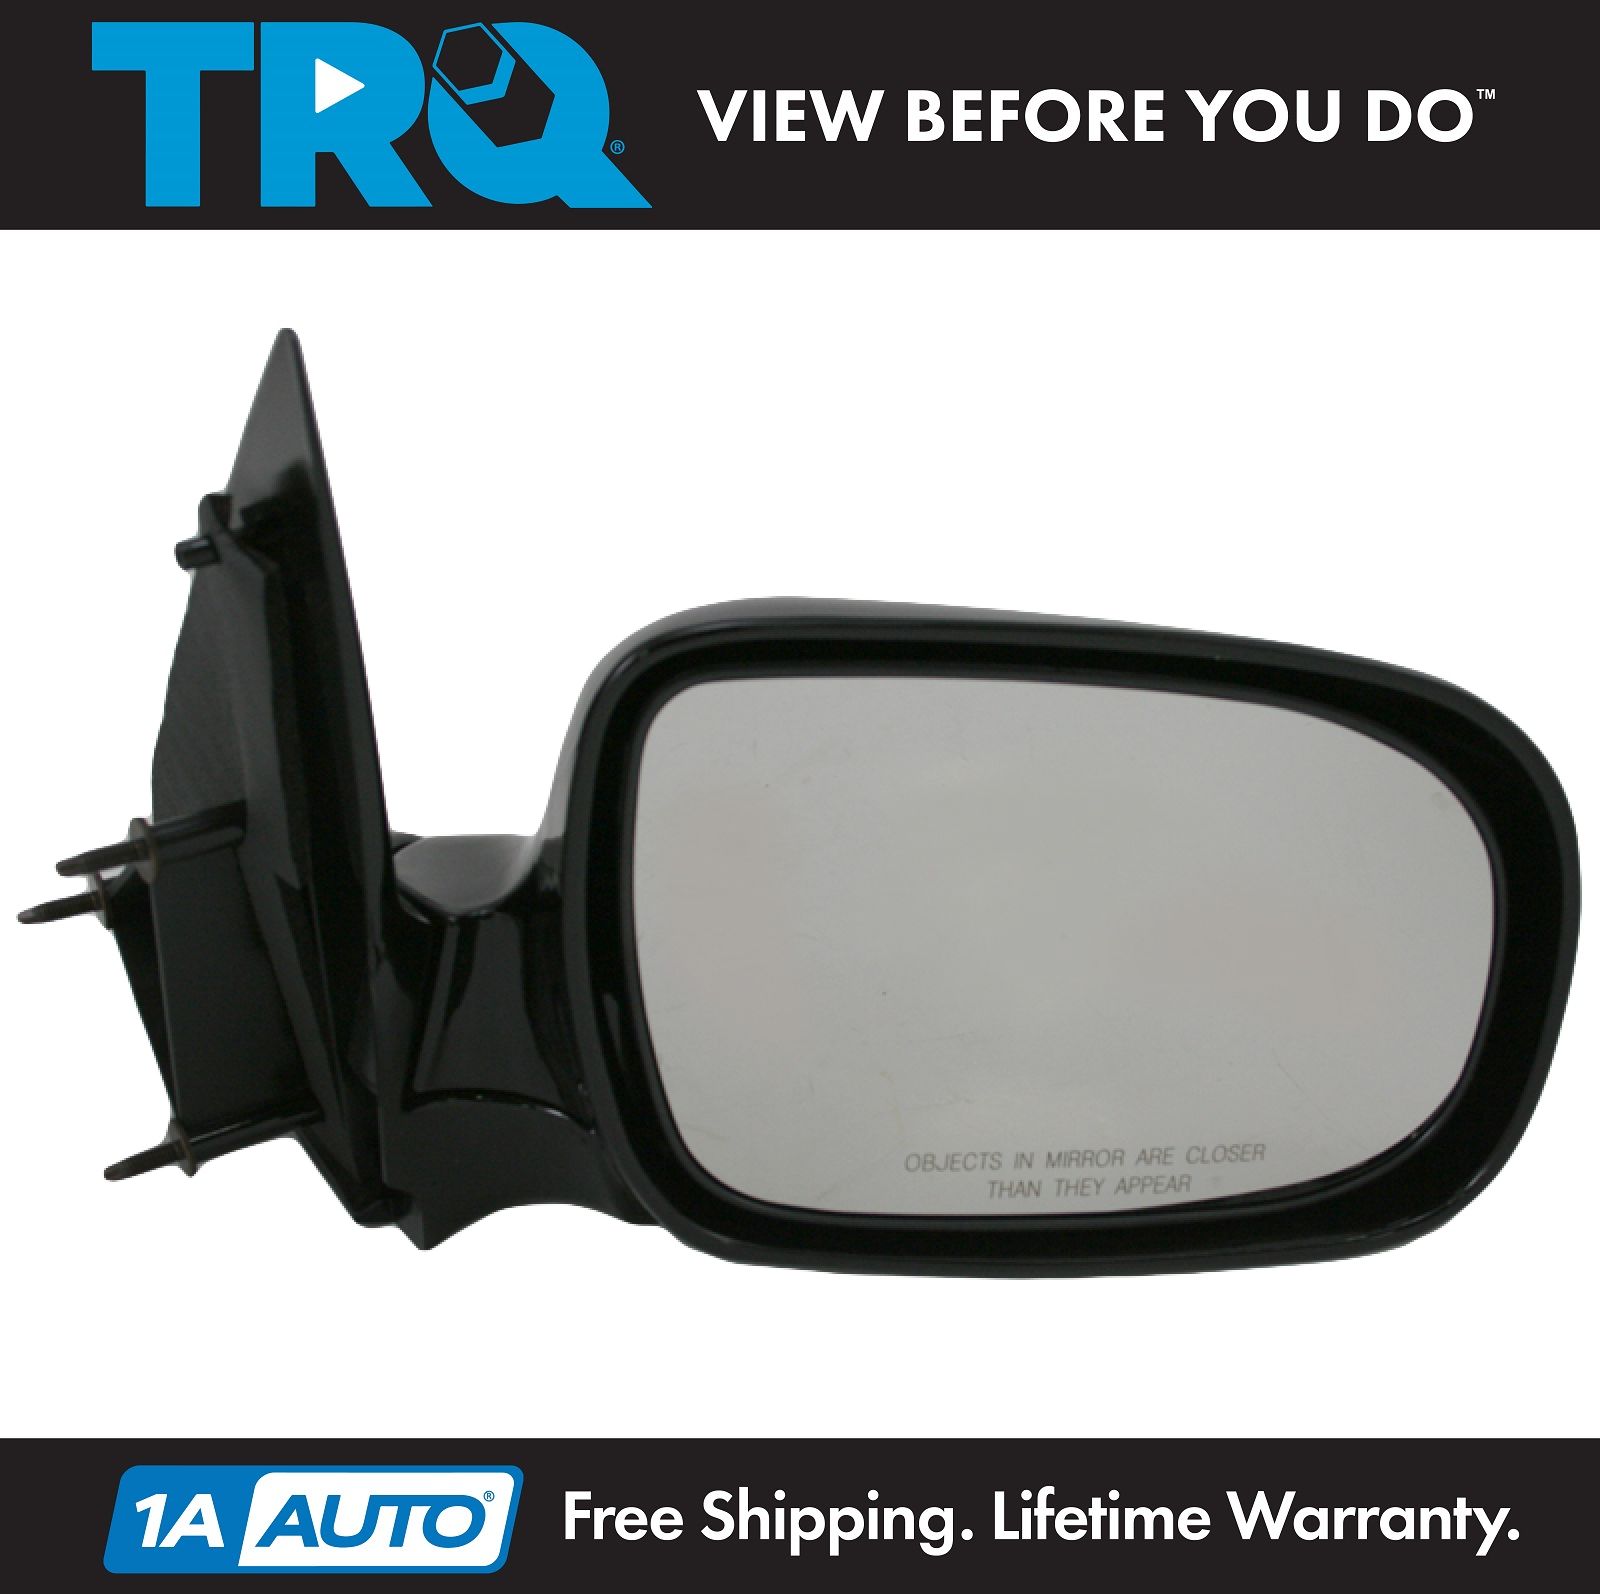 1997-2004 Olds Silhouette Mirror MANUAL Passenger Side